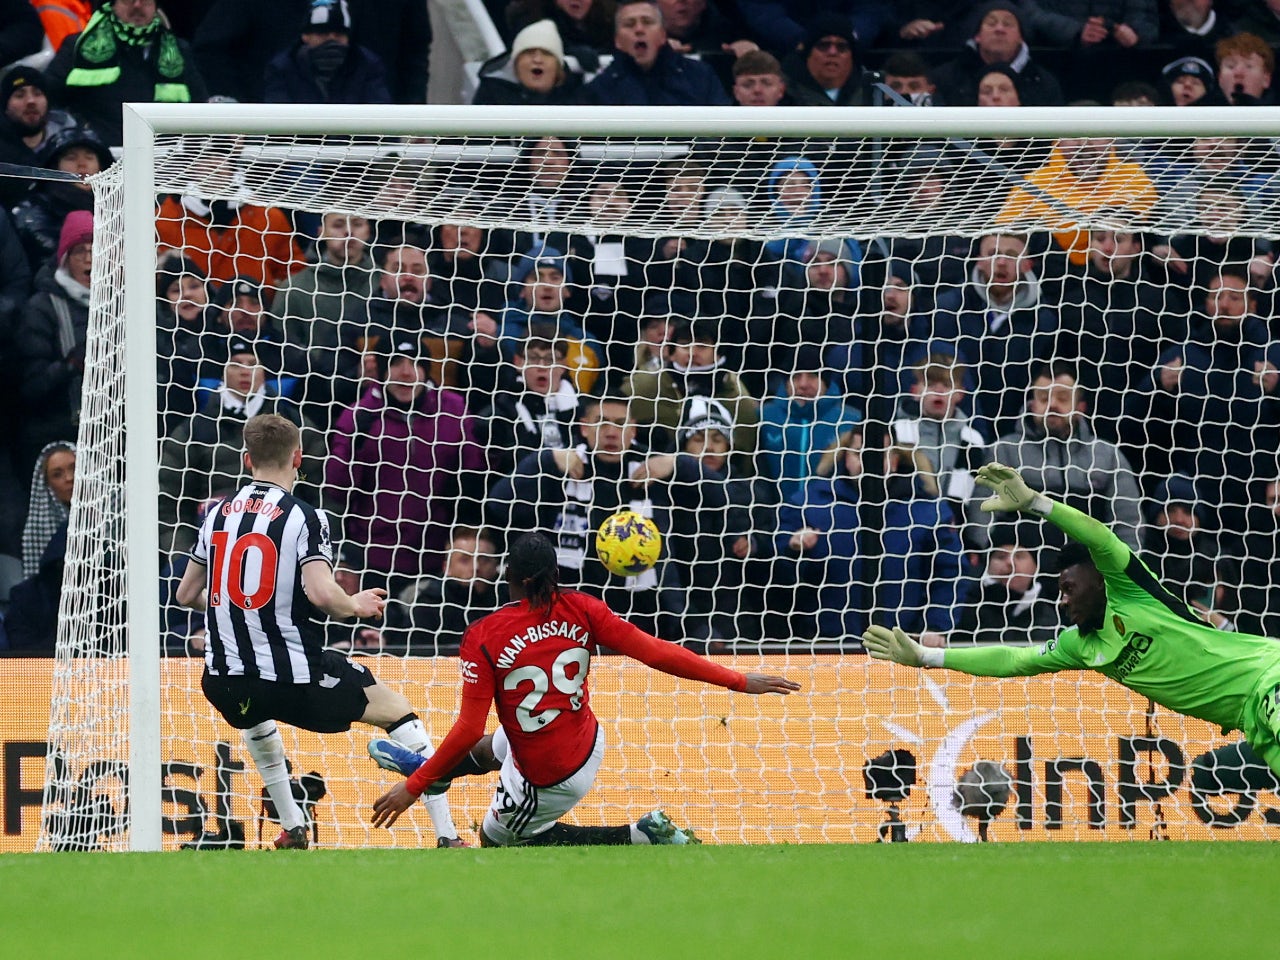 Newcastle United rise to fifth with deserved win over Manchester United